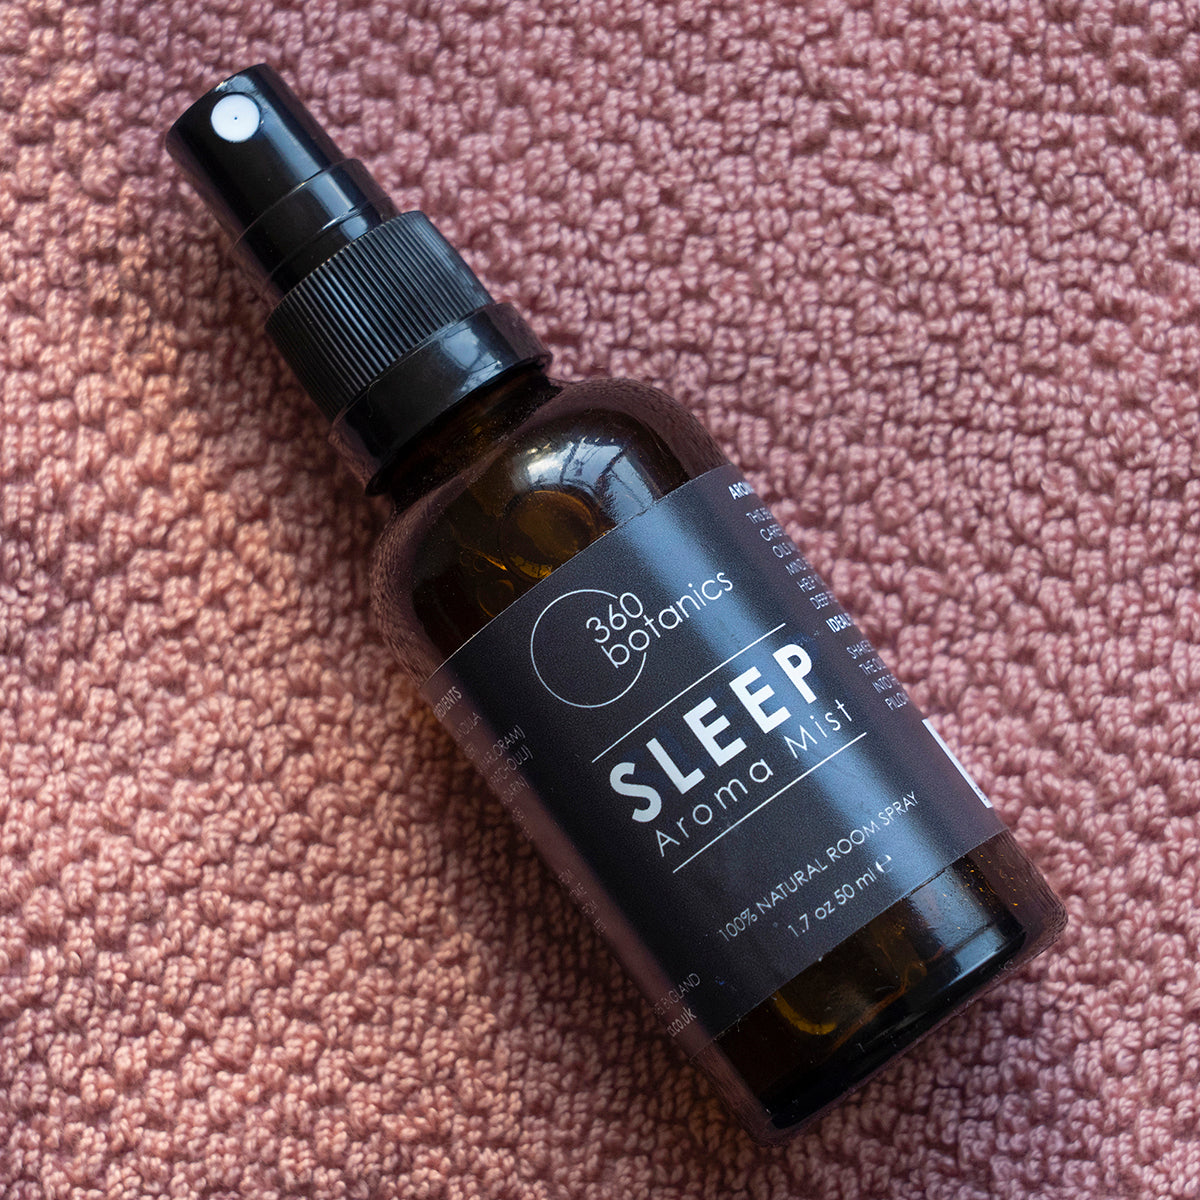 A bottle of 360 Botanics Sleep Aroma Mist, a 100% natural room spray in a 1.7 oz or 50 ml bottle with a spray nozzle, resting on a textured pink fabric surface.